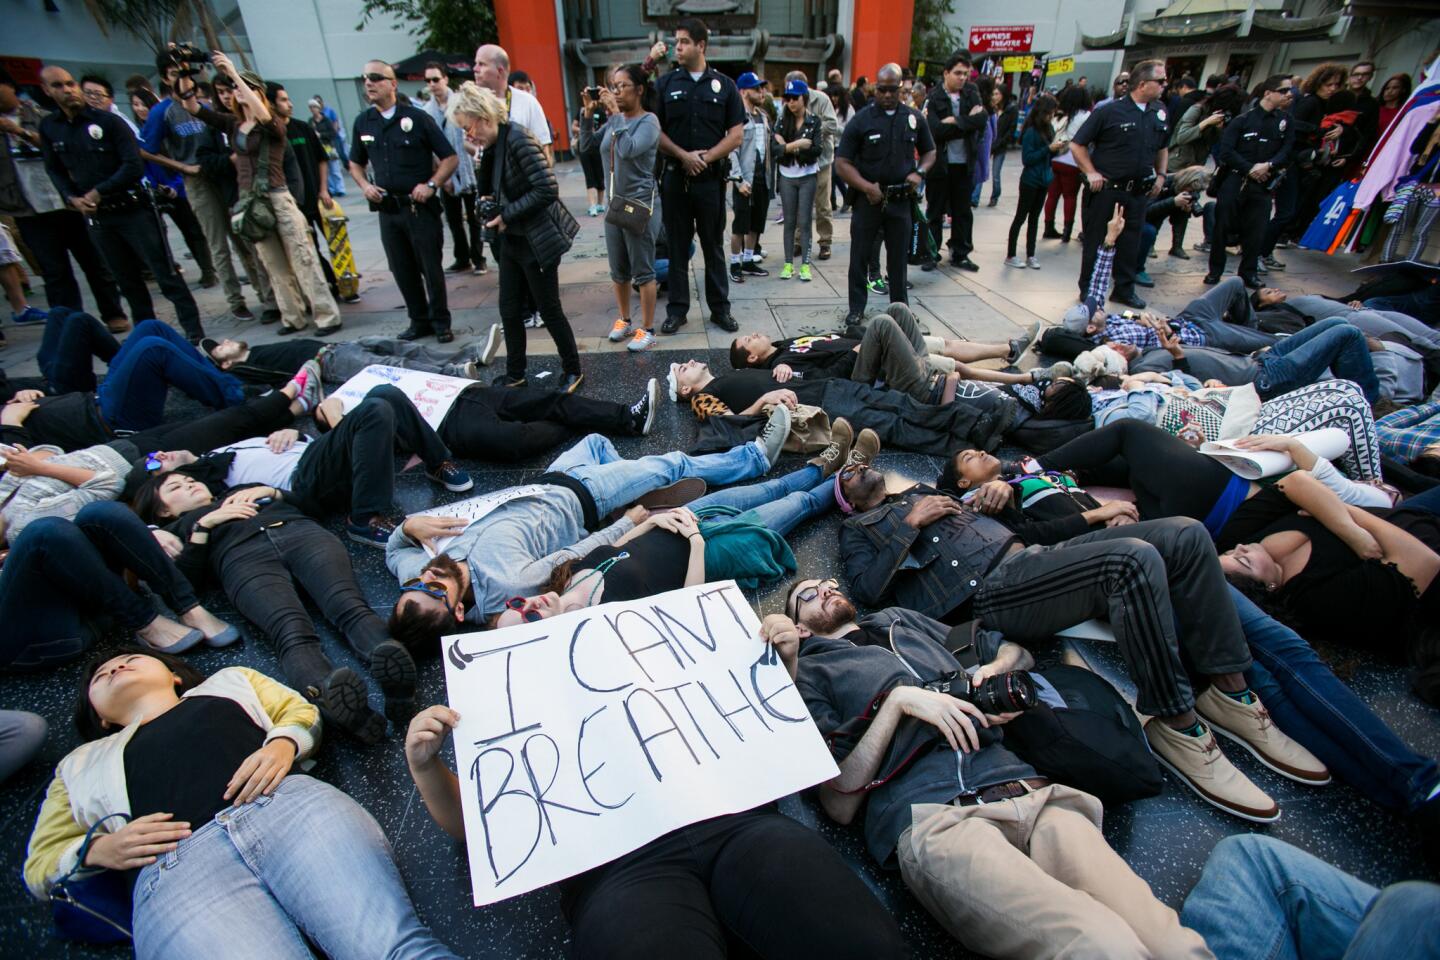 Demonstrators protesting police brutality lie on the sidewalk for a "die-in" outside the TCL Chinese Theatre in Hollywood.